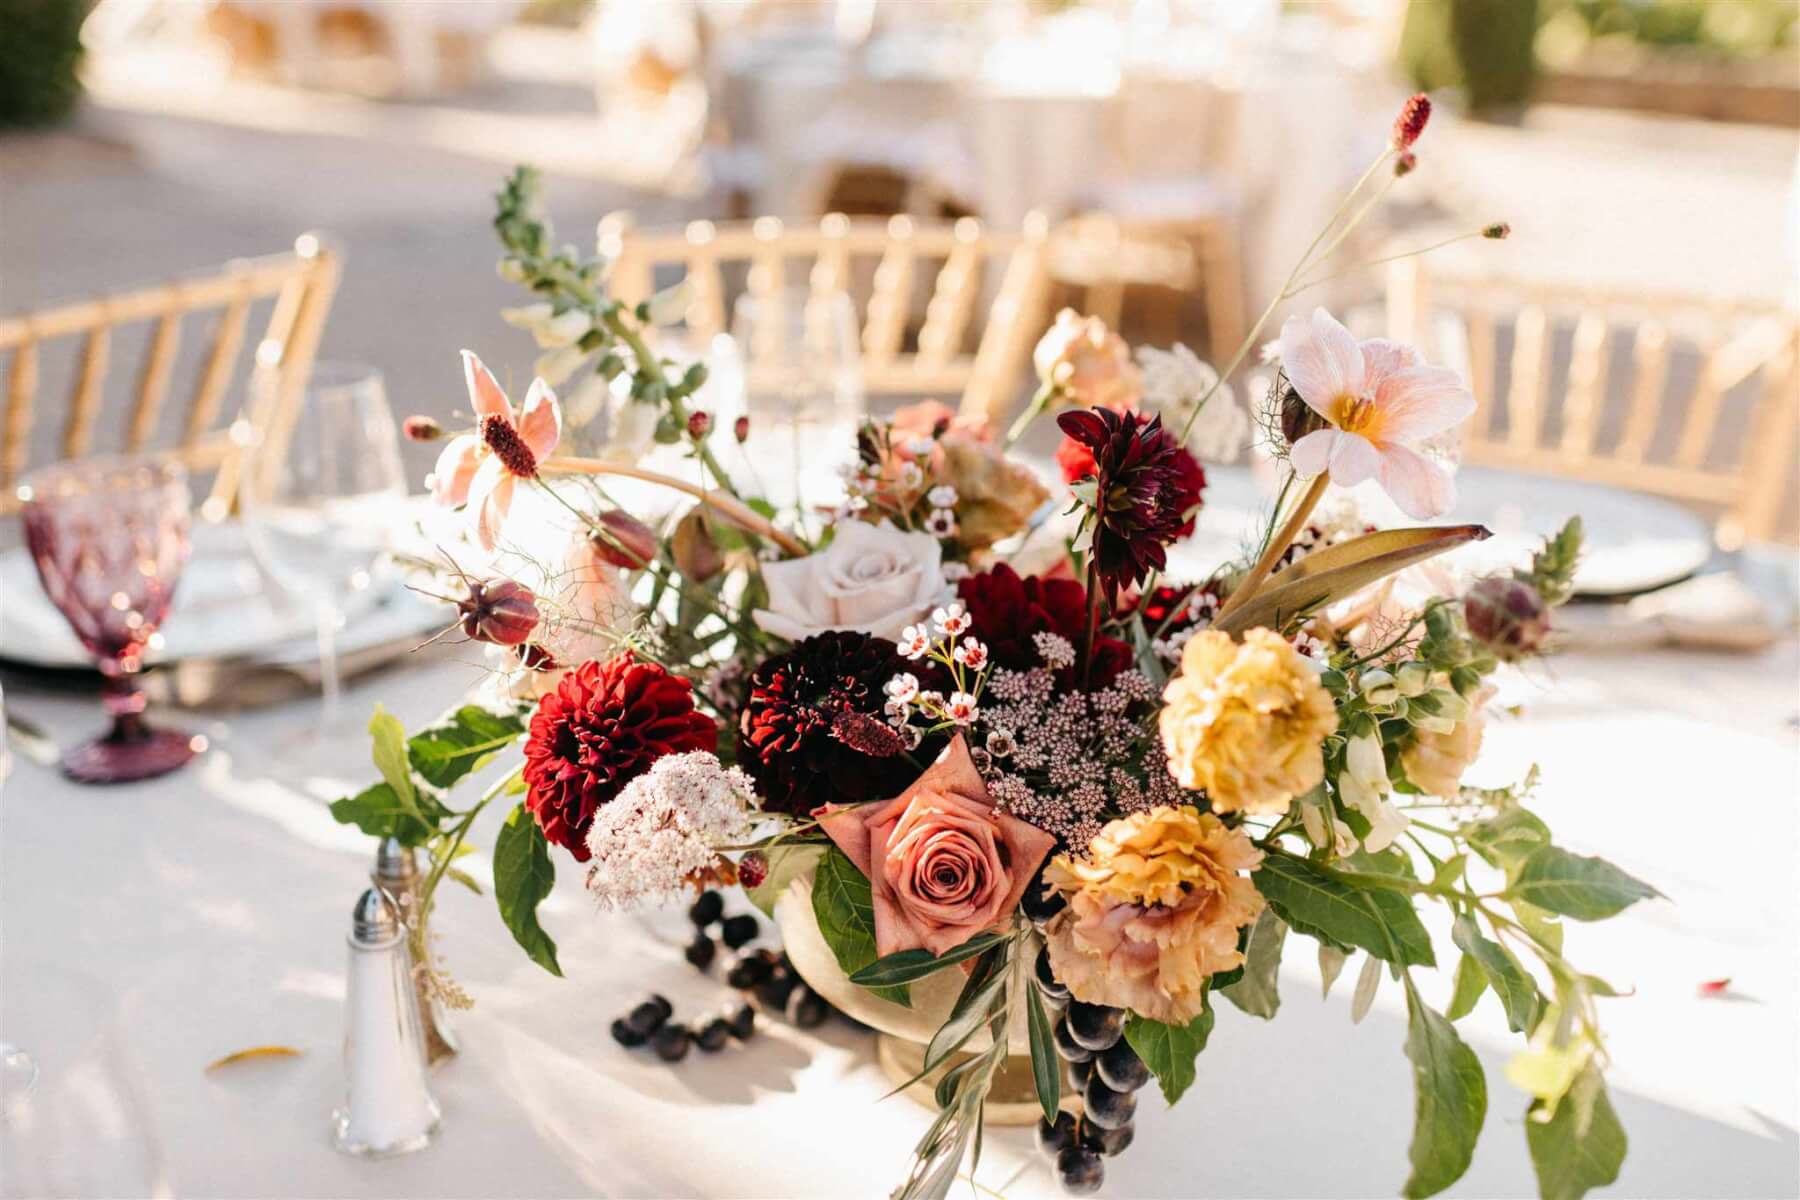 Close up of an elegant floral arrangement on the wedding table with flowers in deep plum, light blush, peach, and greenery.